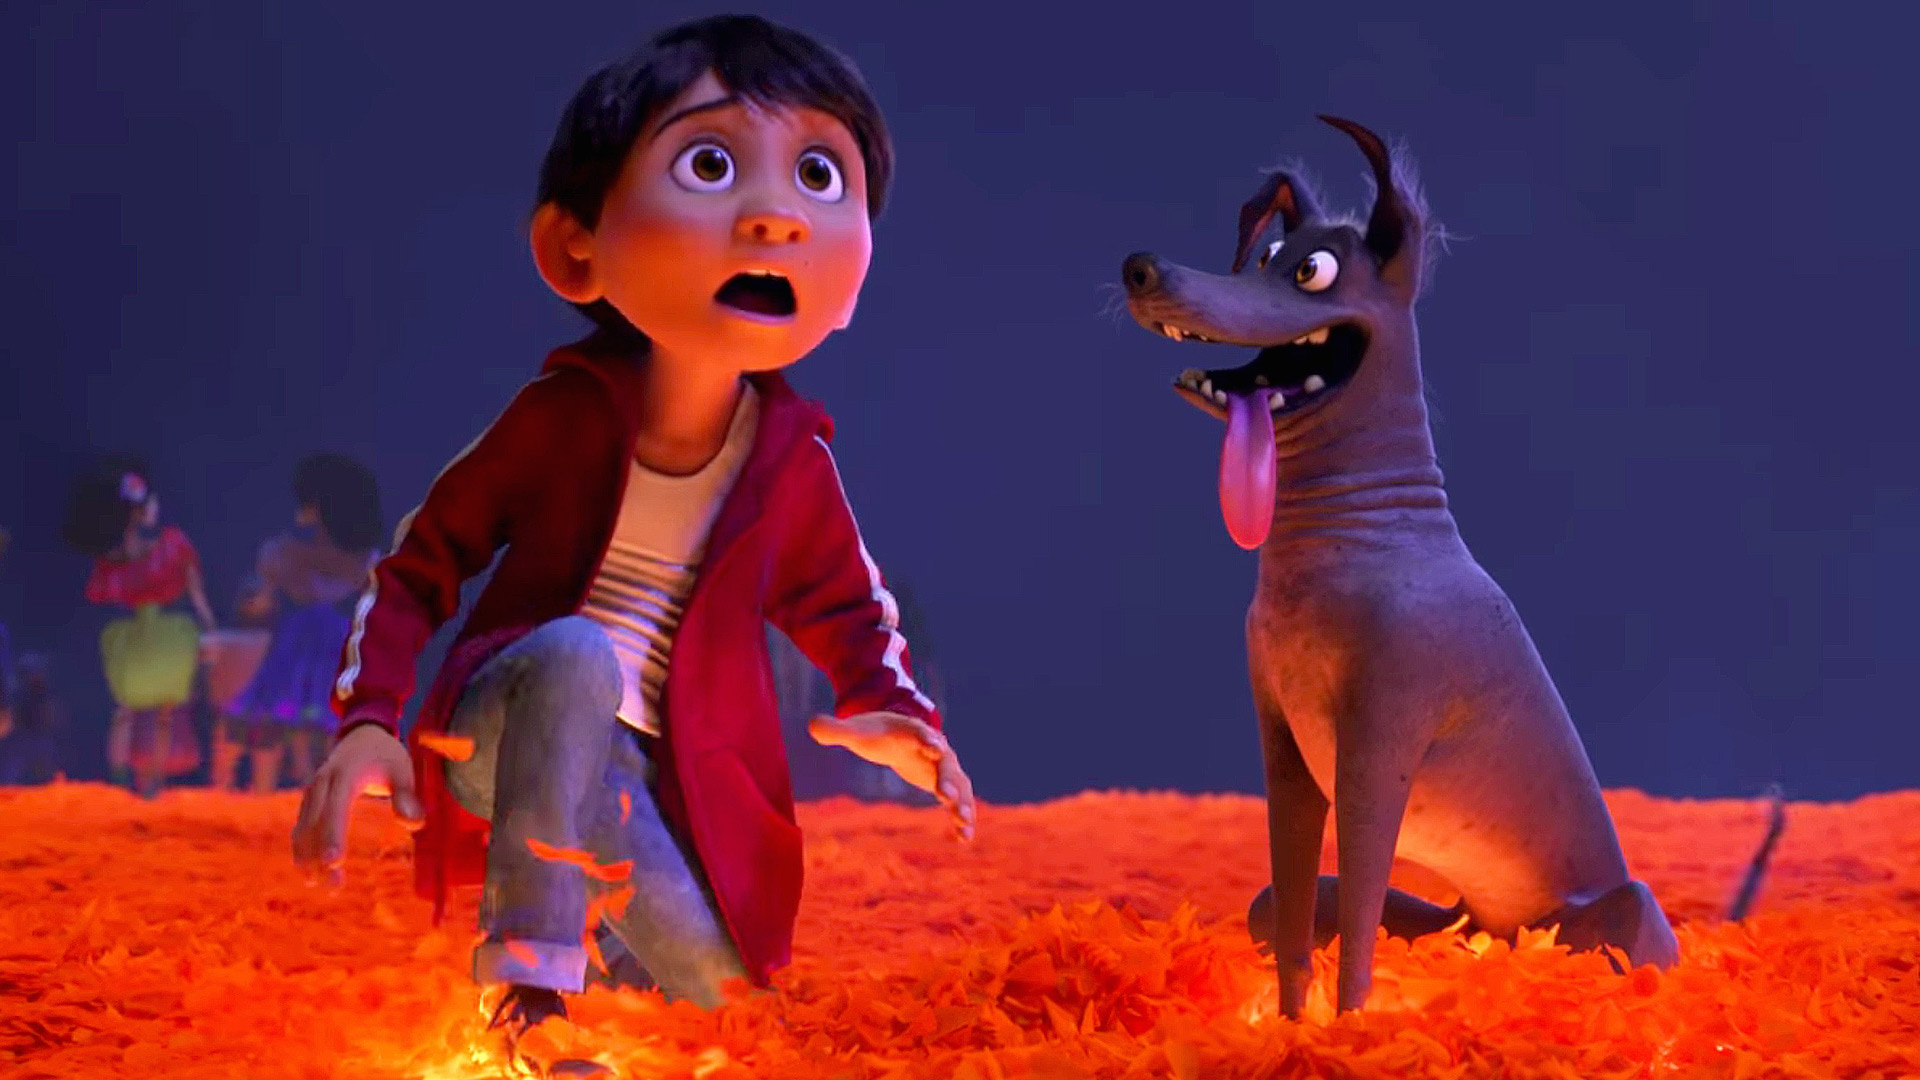 Coco – Miguel and his dog